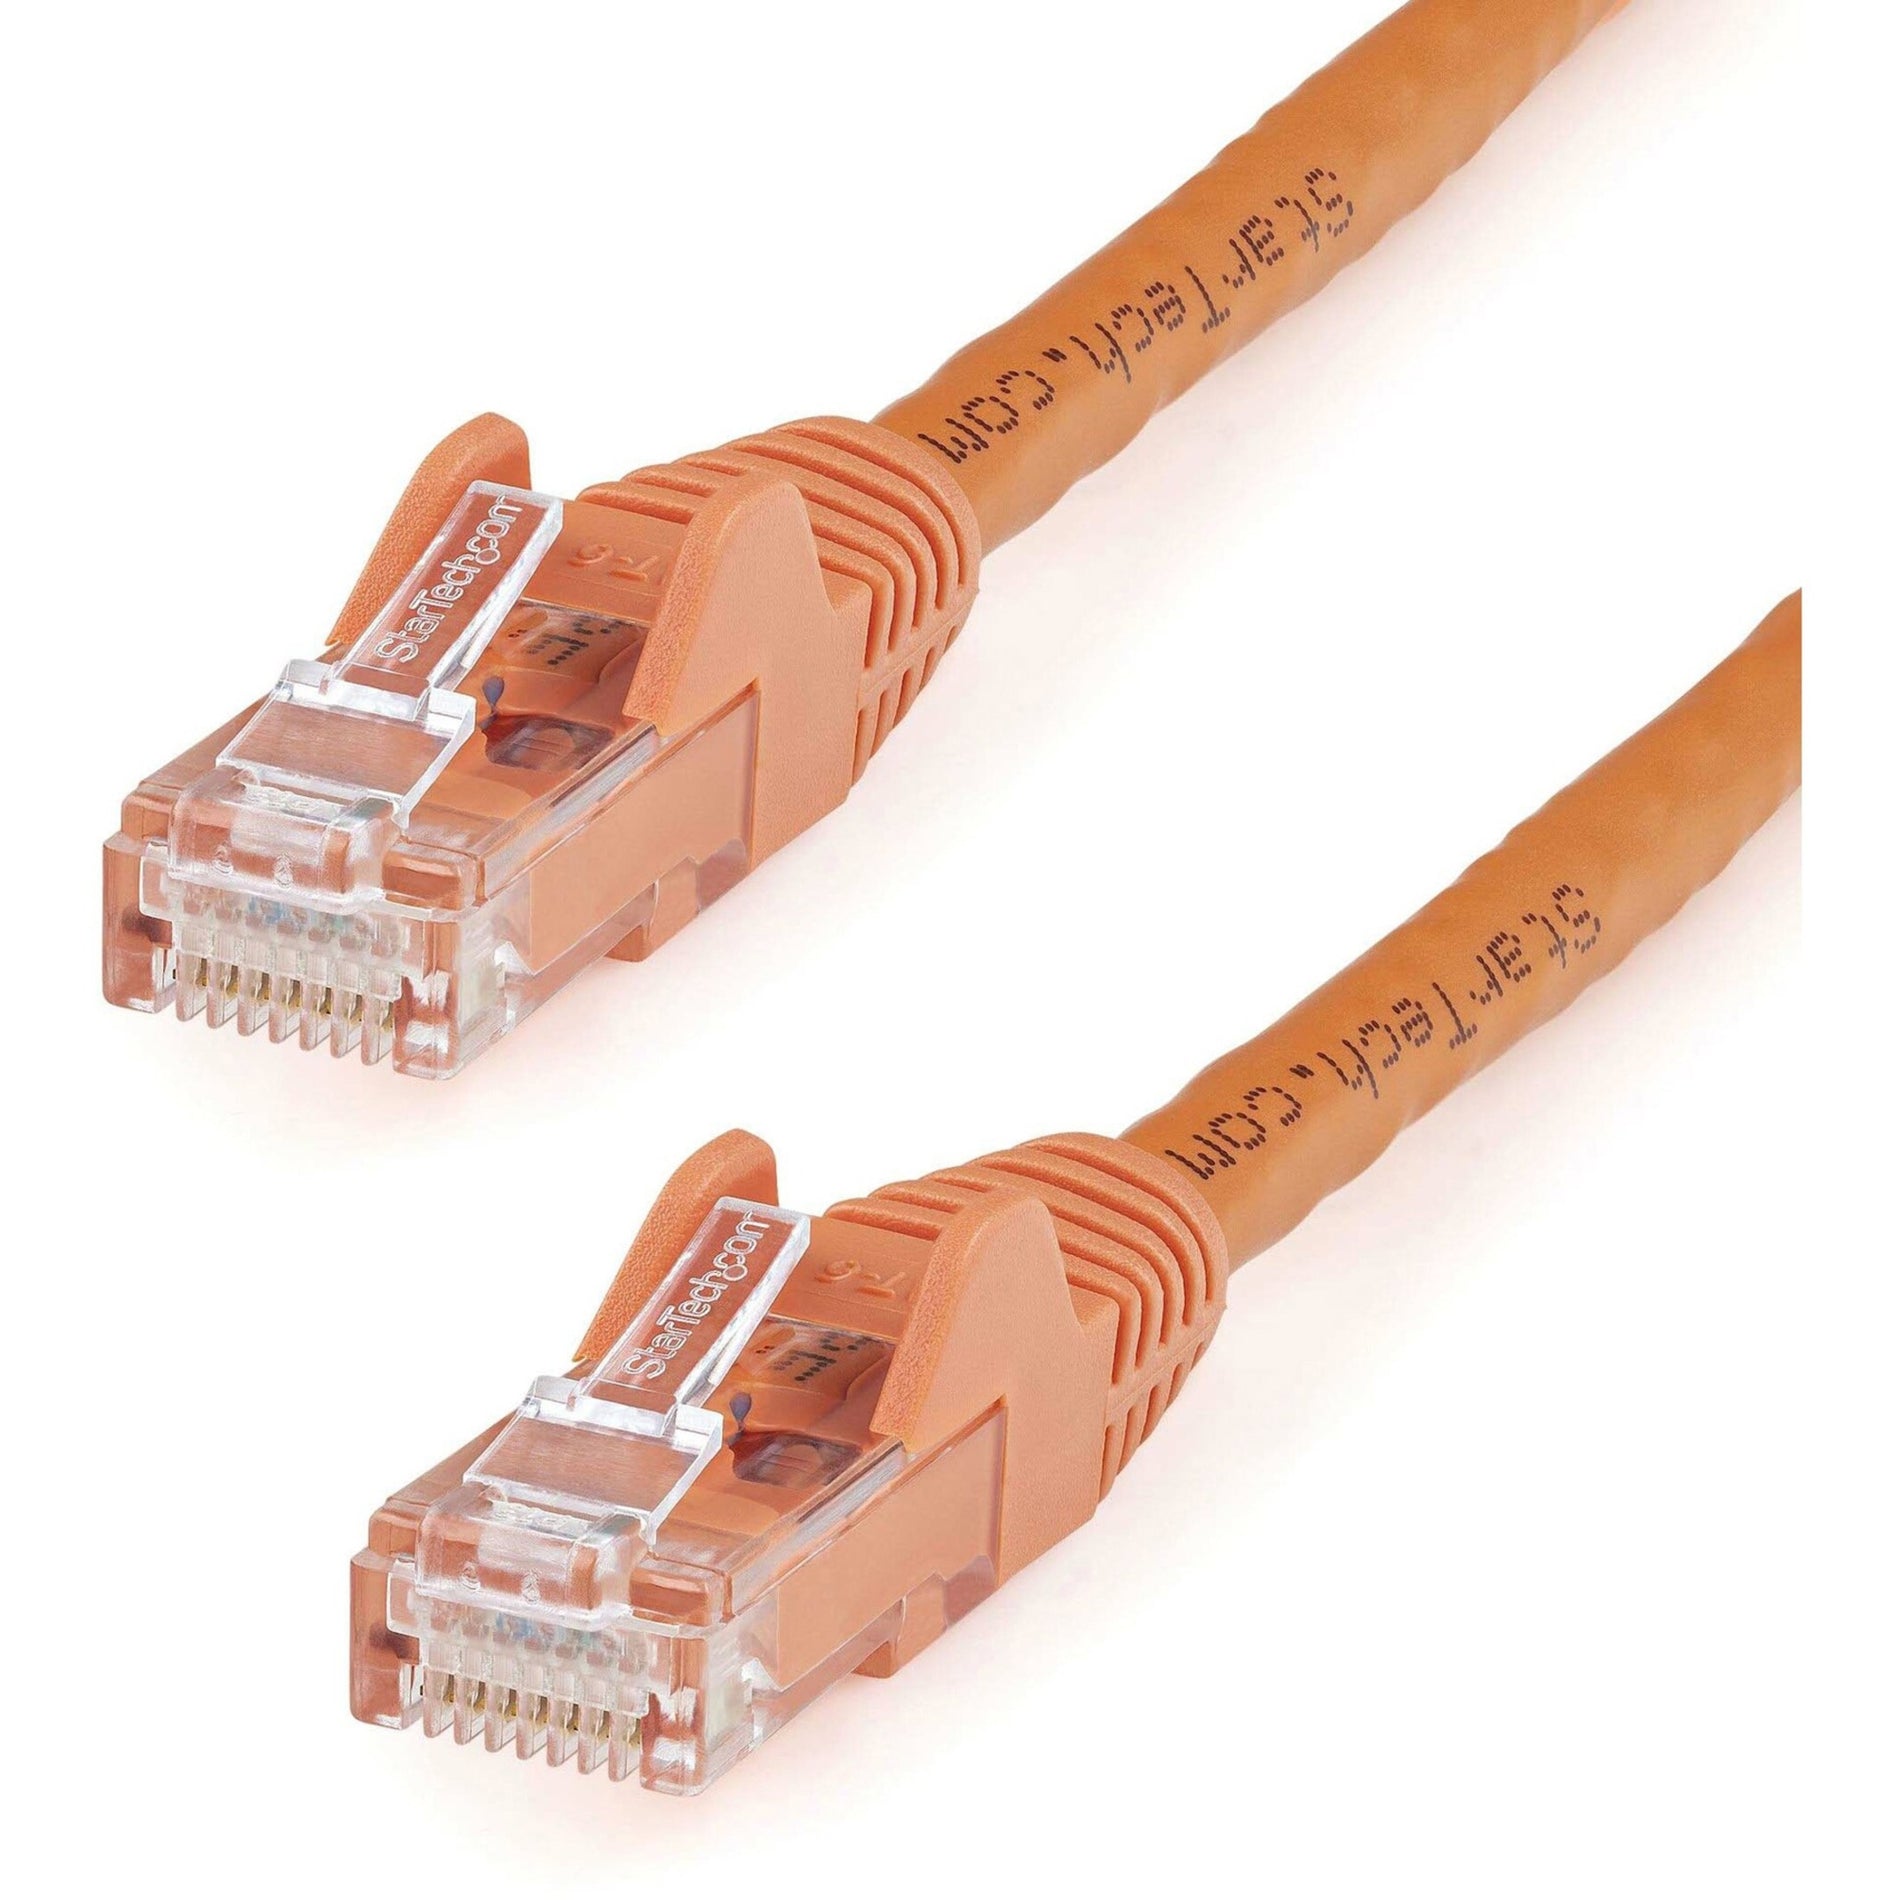 StarTech.com N6PATCH20OR Cat. 6 Network Cable, 20ft Orange Ethernet Cable, Snagless RJ45 Connectors